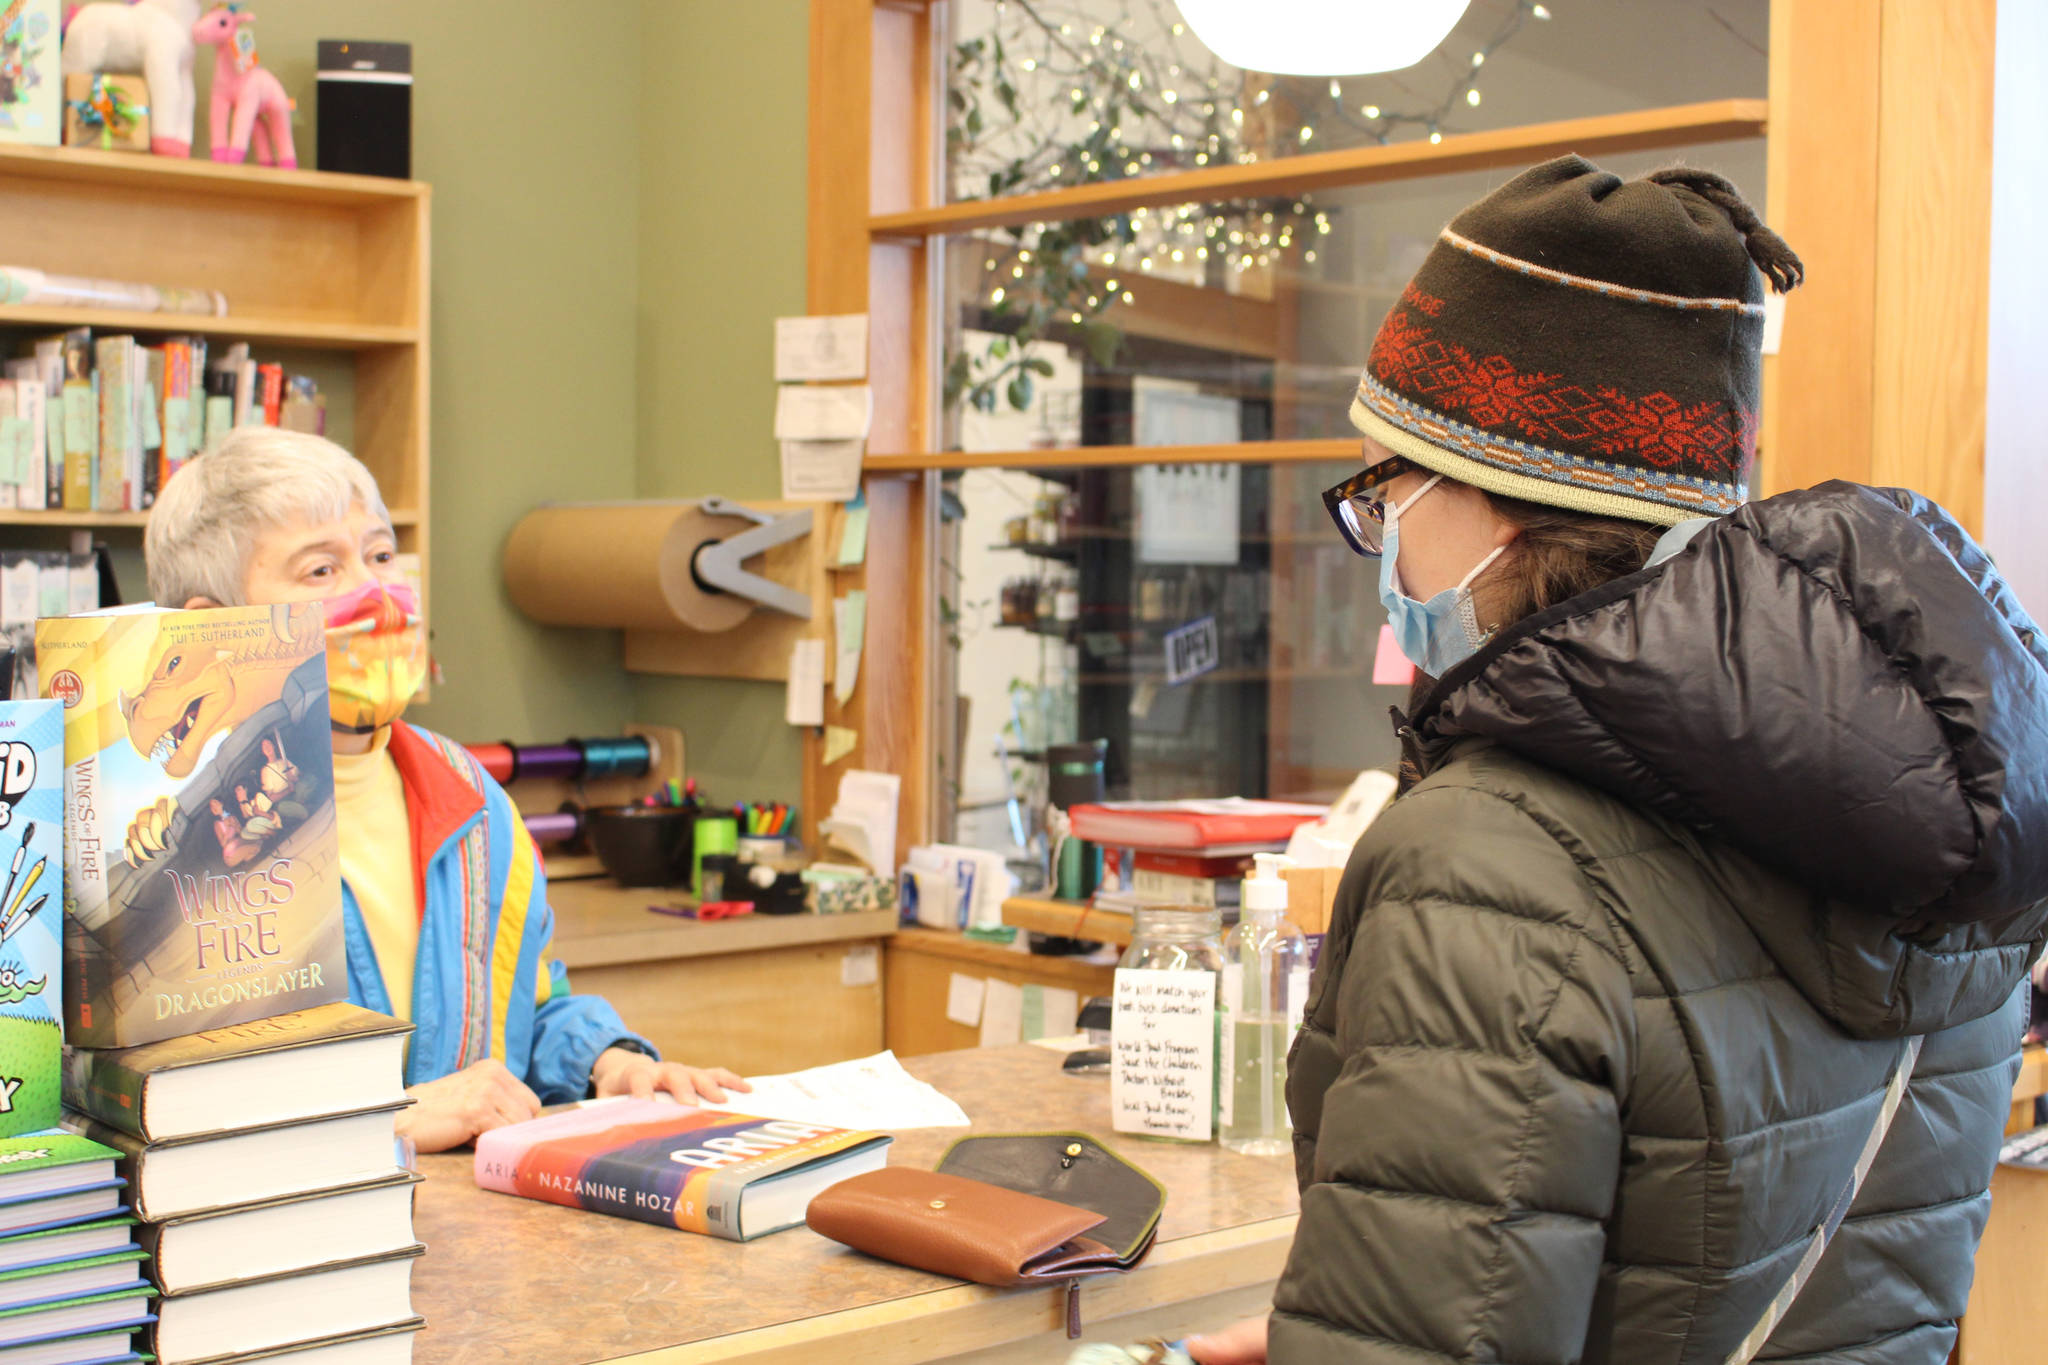 Brian Mazurek/Peninsula Clarion 
Maria Dixson, left, rings up a purchase by Sarah Pyhala, right, at River City Books in Soldotna on Saturday.